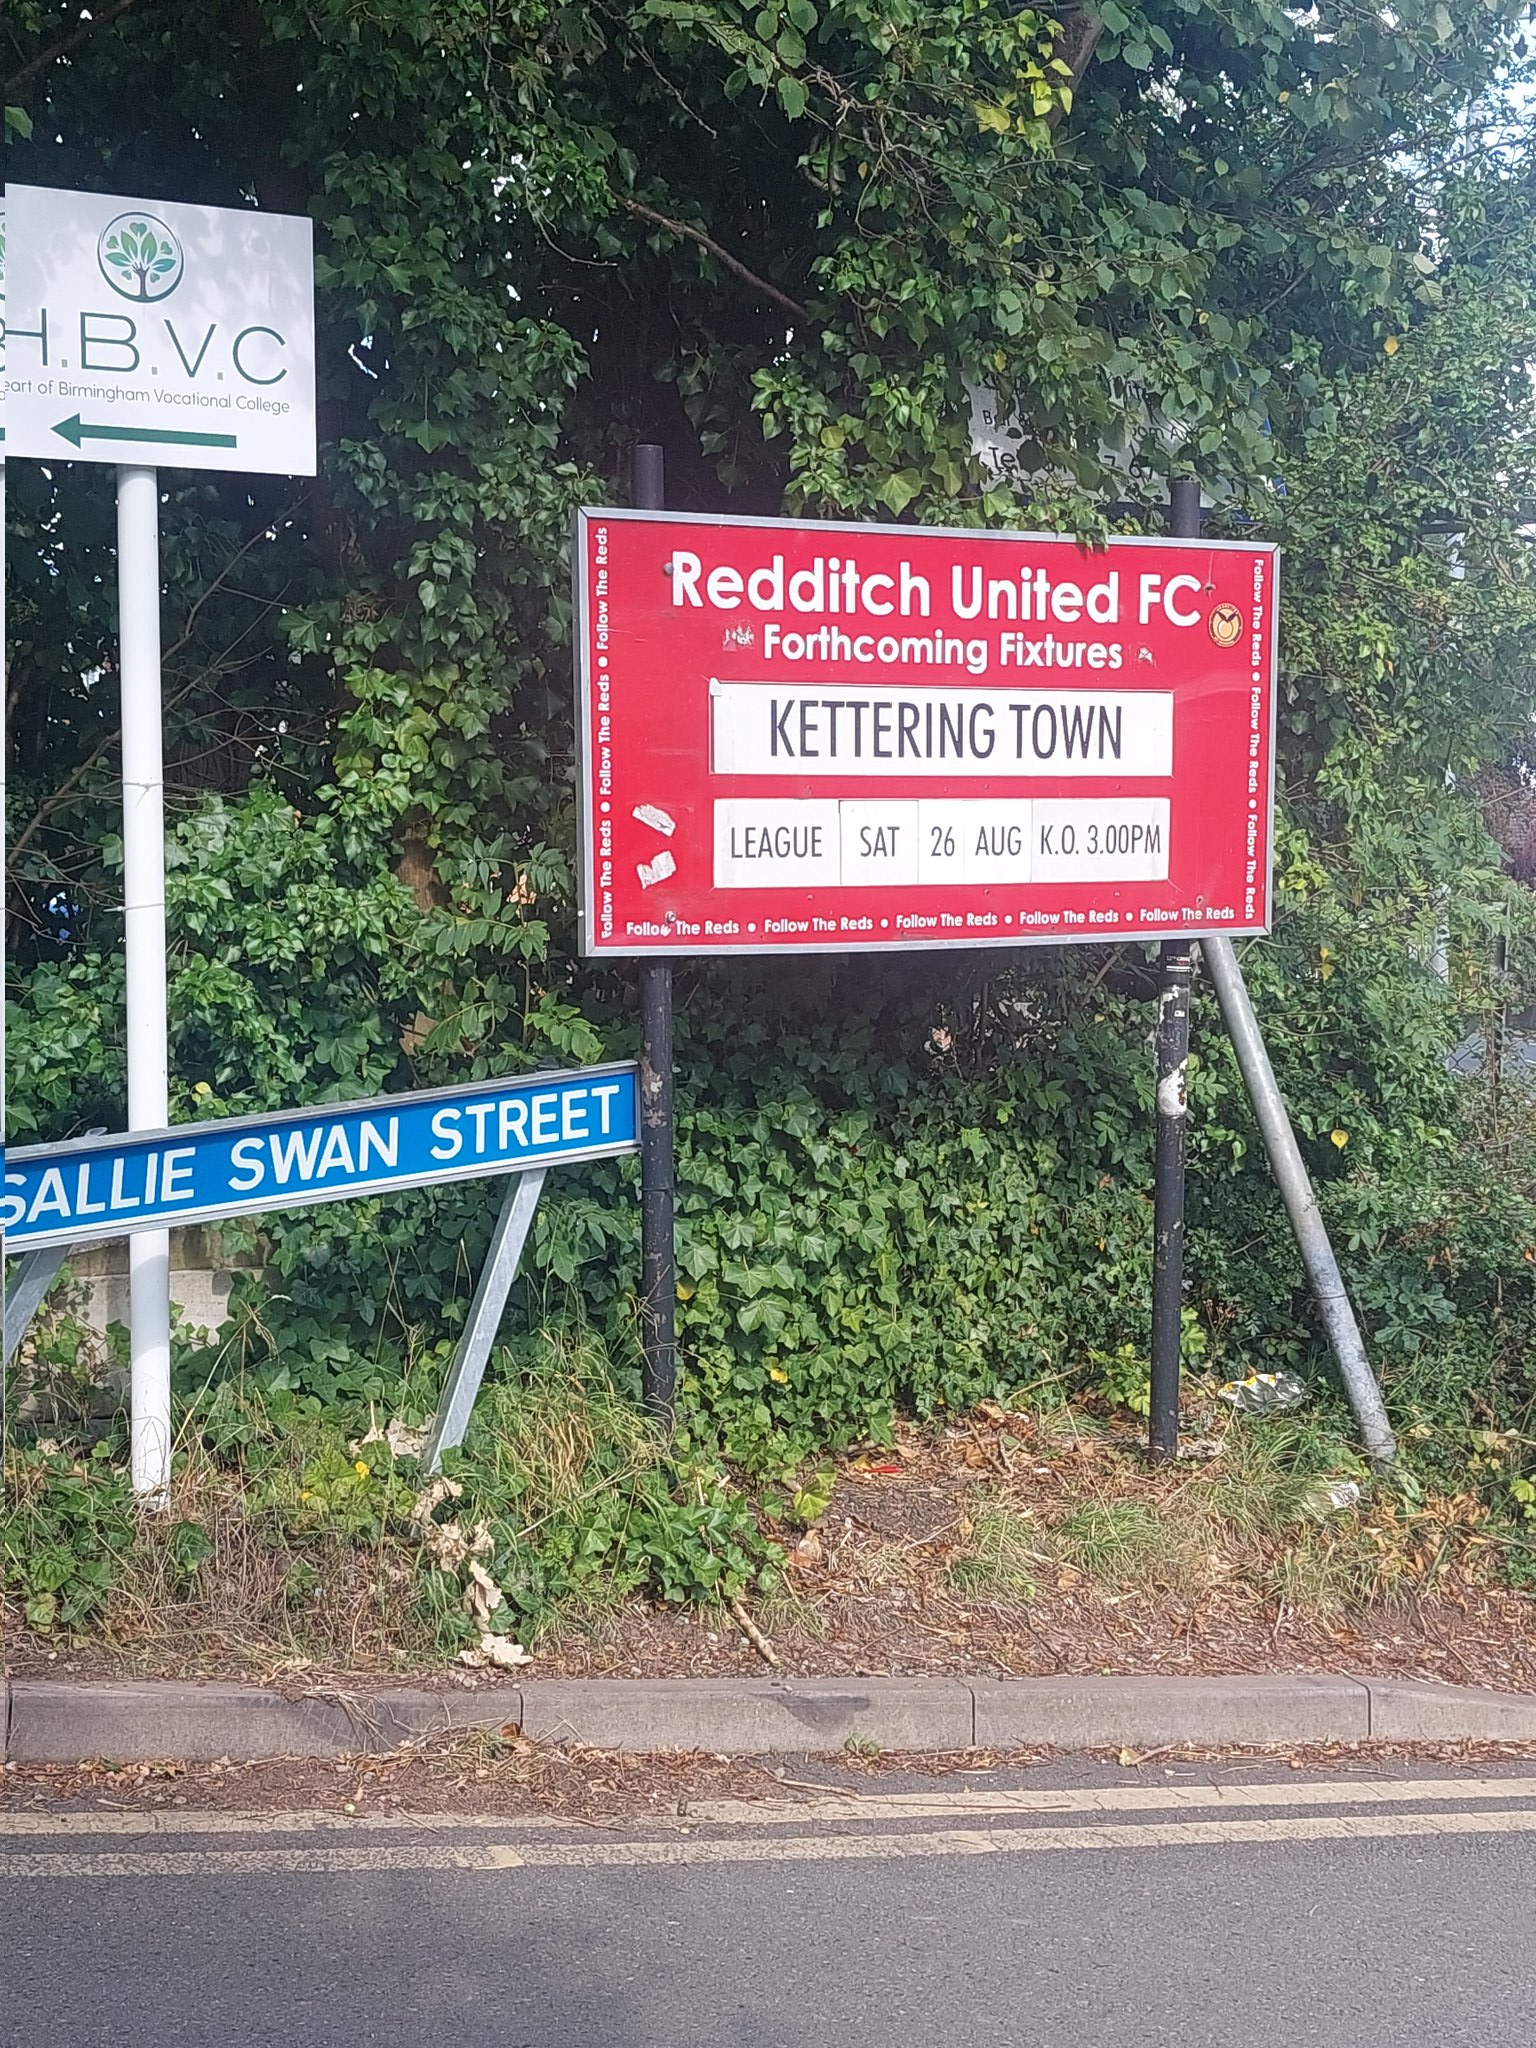 West Bromwich Albion Women Make The Valley Their Home - Redditch United  Football Club